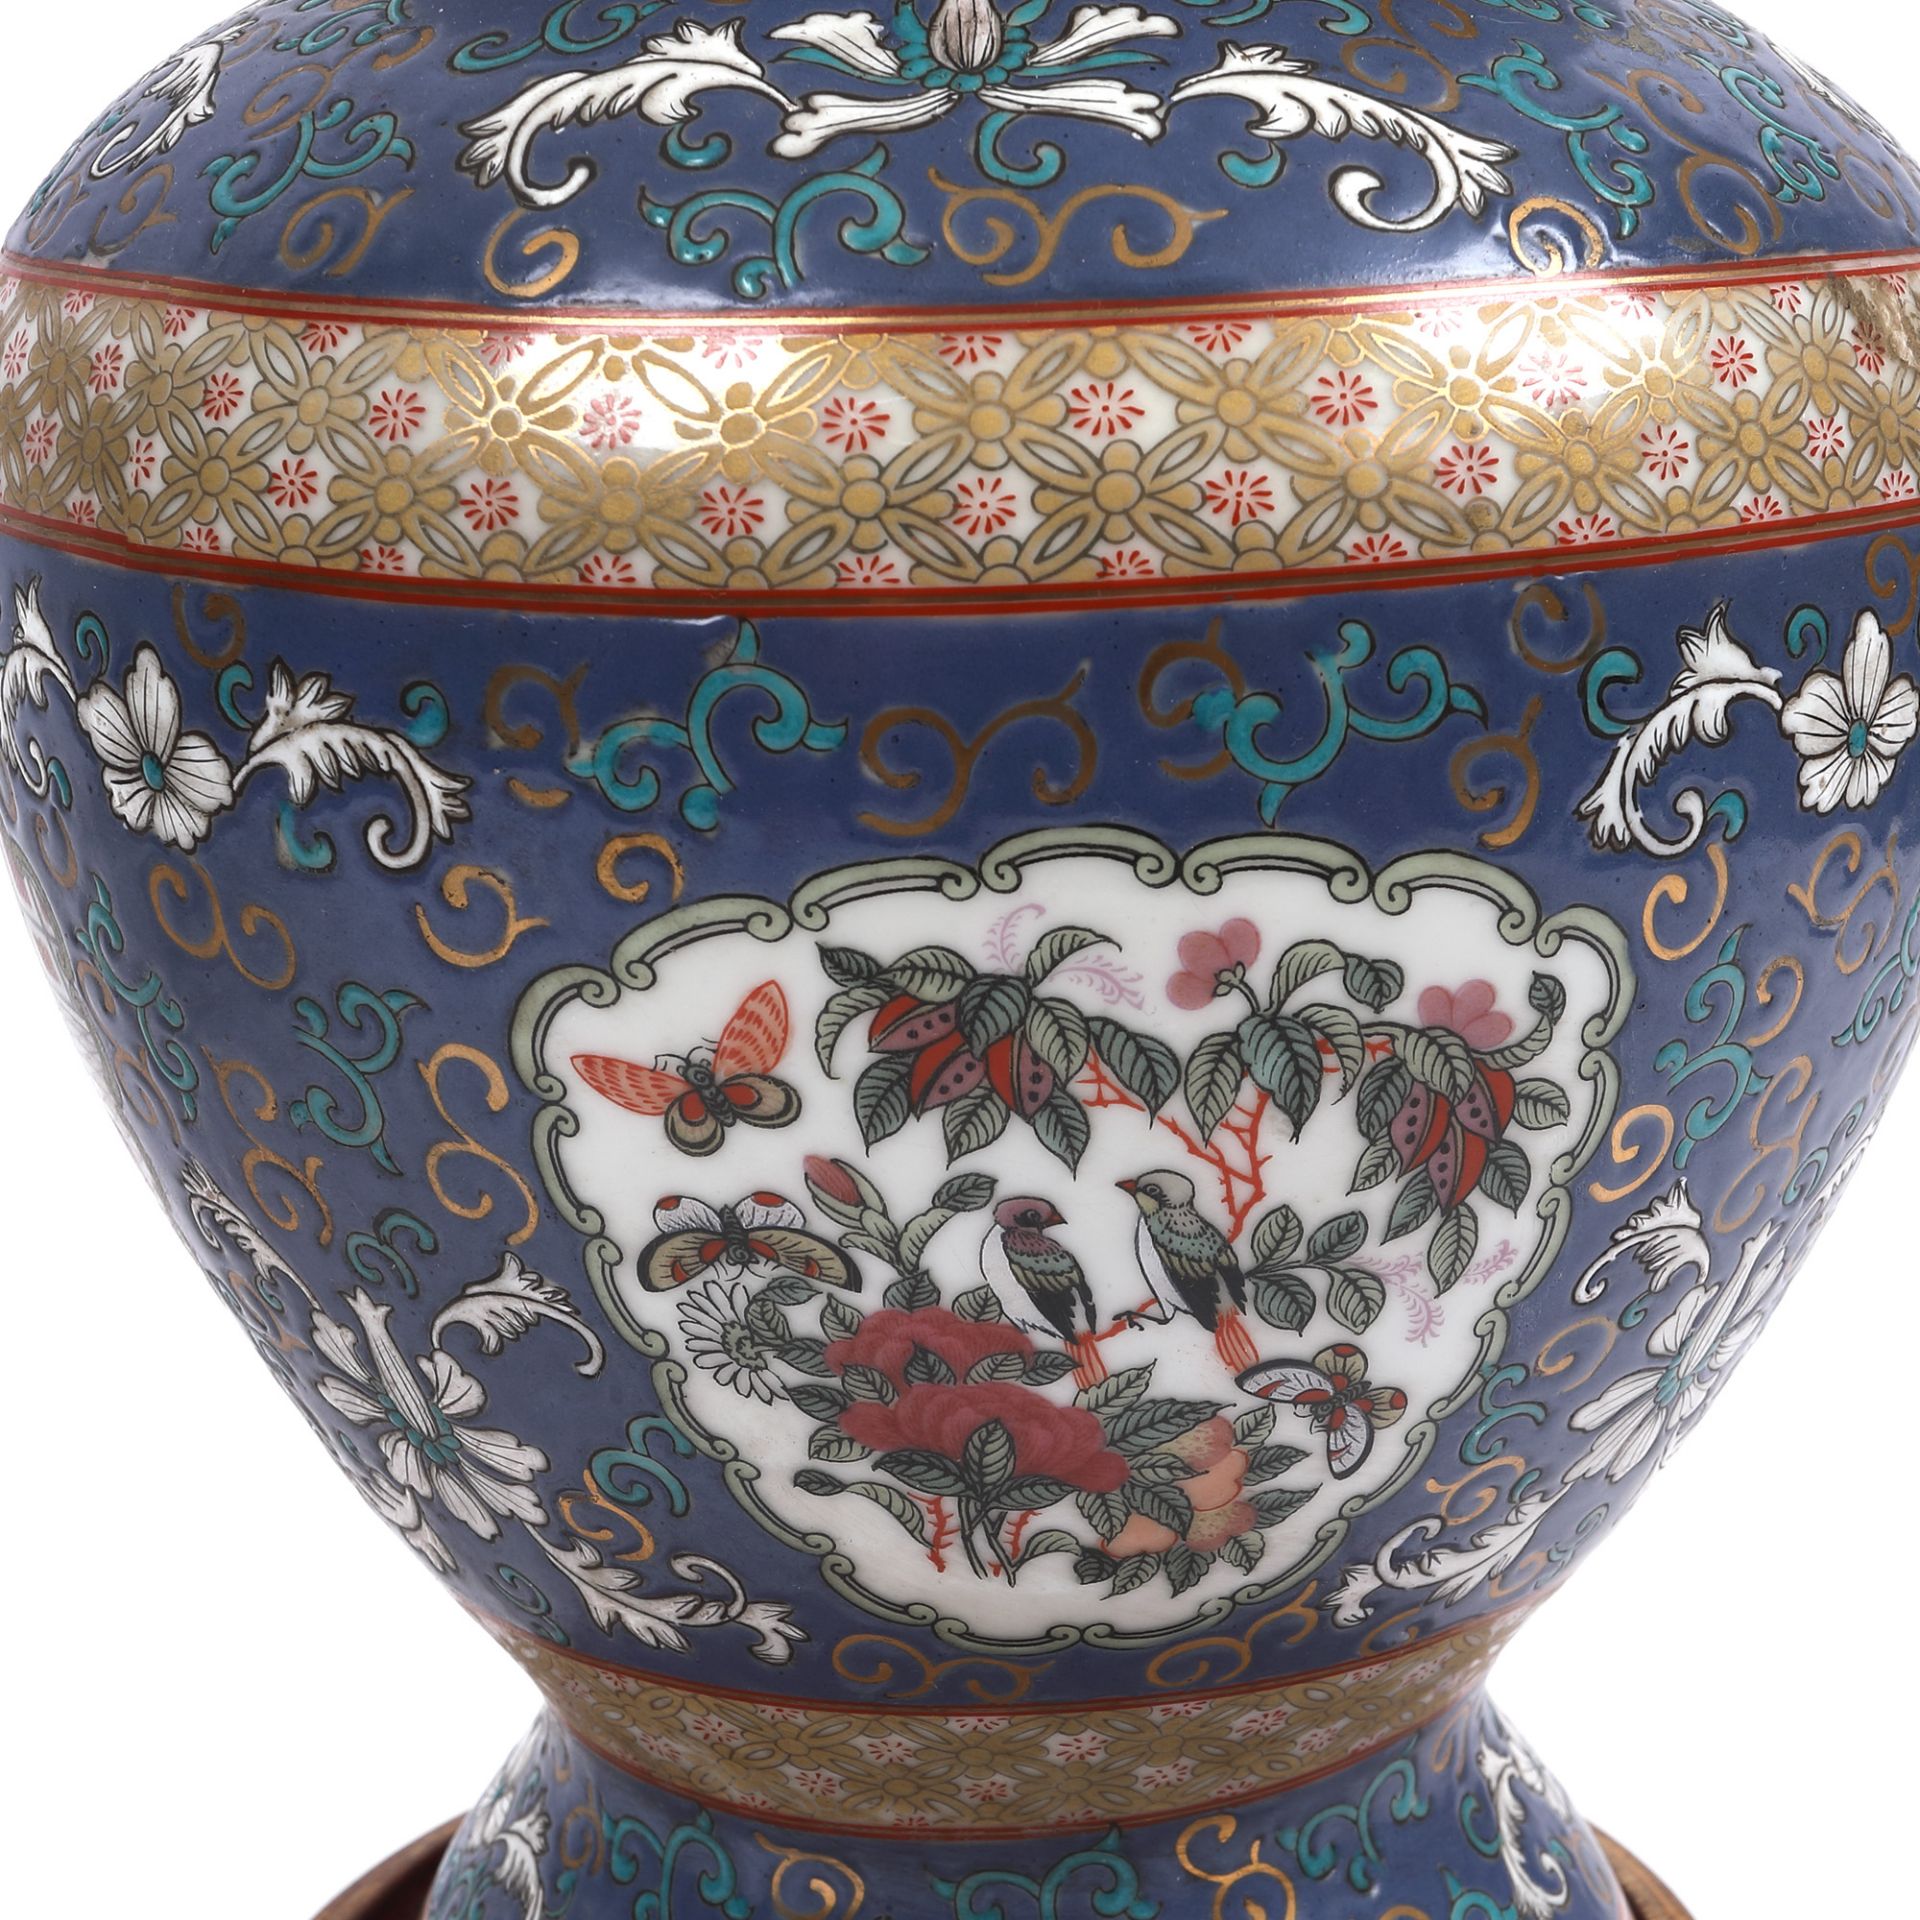 Porcelain and glass lamp, with chinoiserie decoration - Image 4 of 4